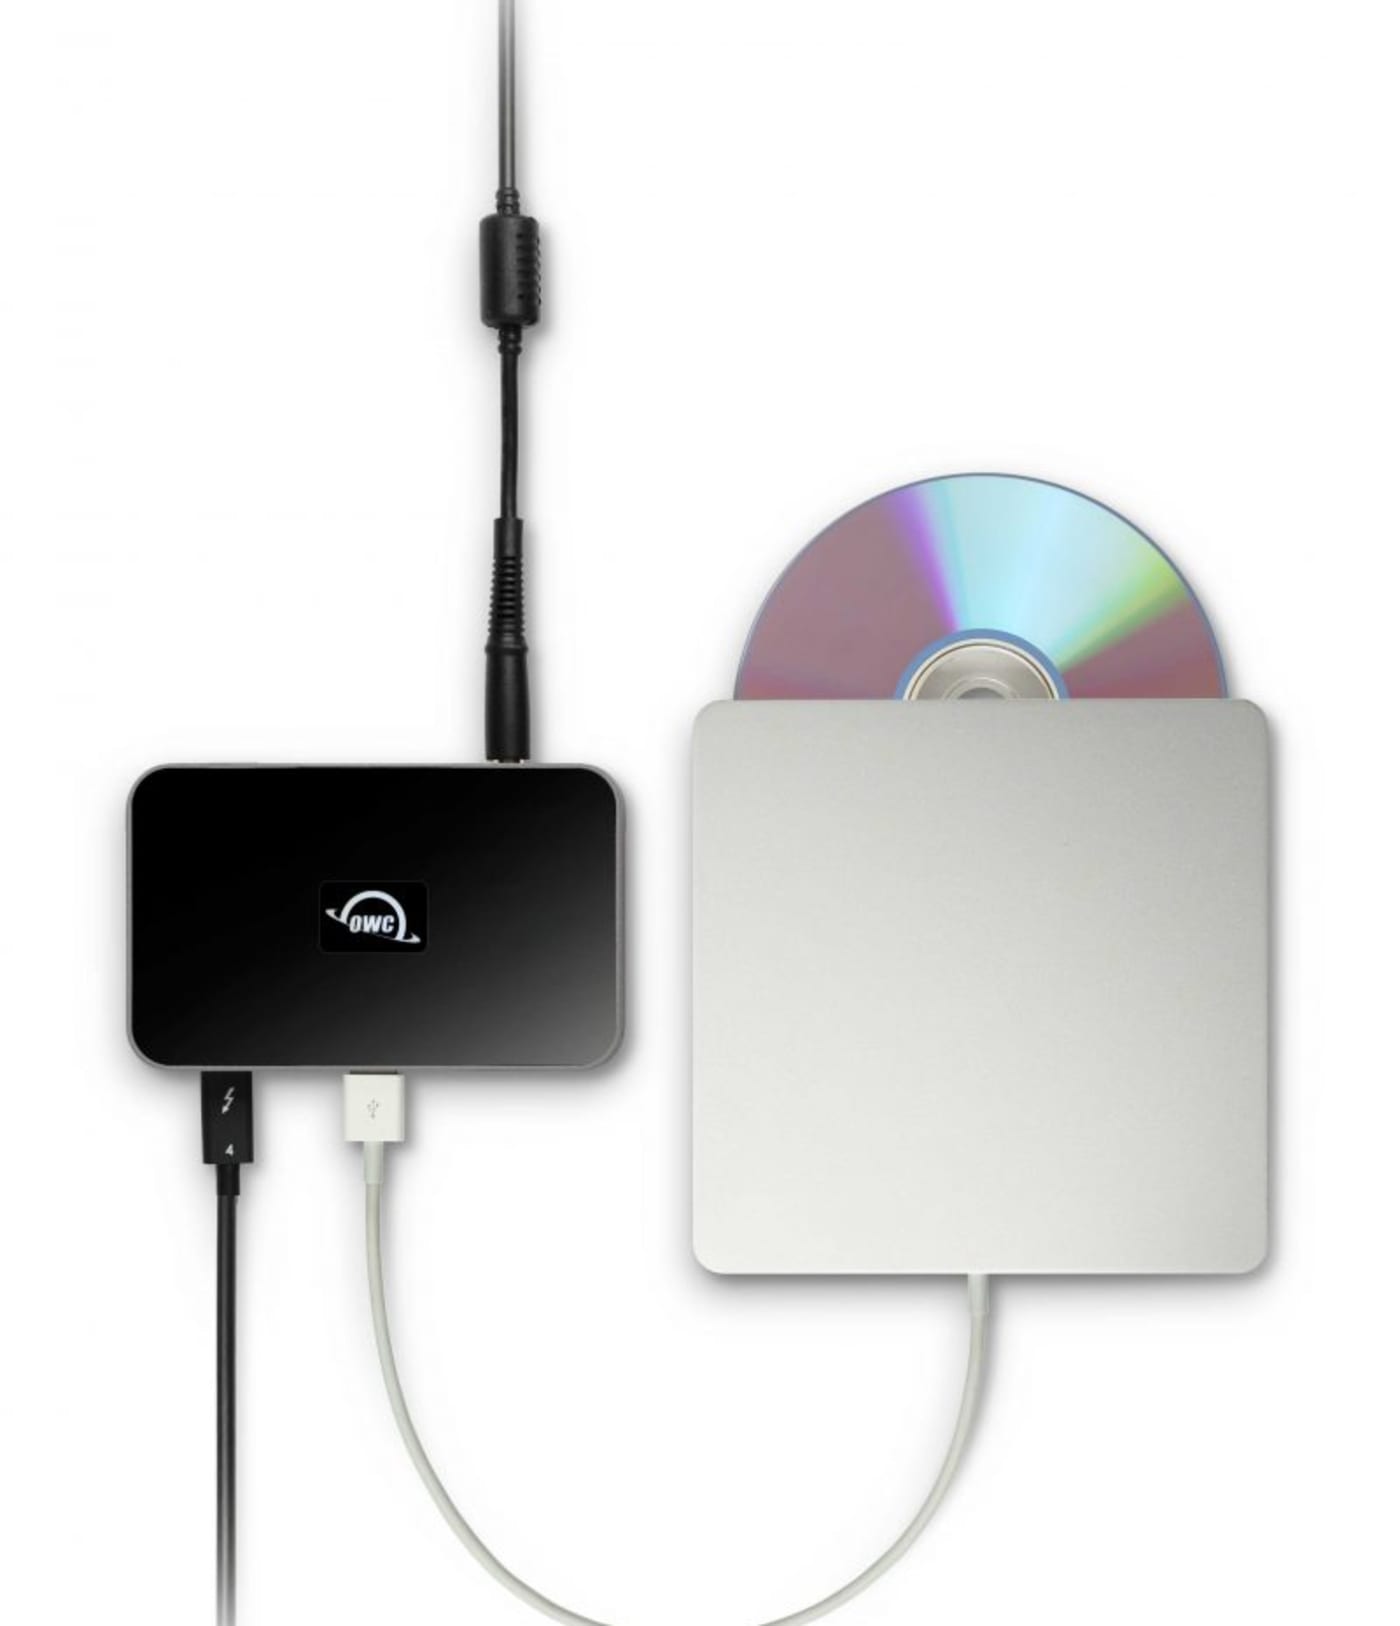 OWC Thunderbolt Hub with Apple SuperDrive